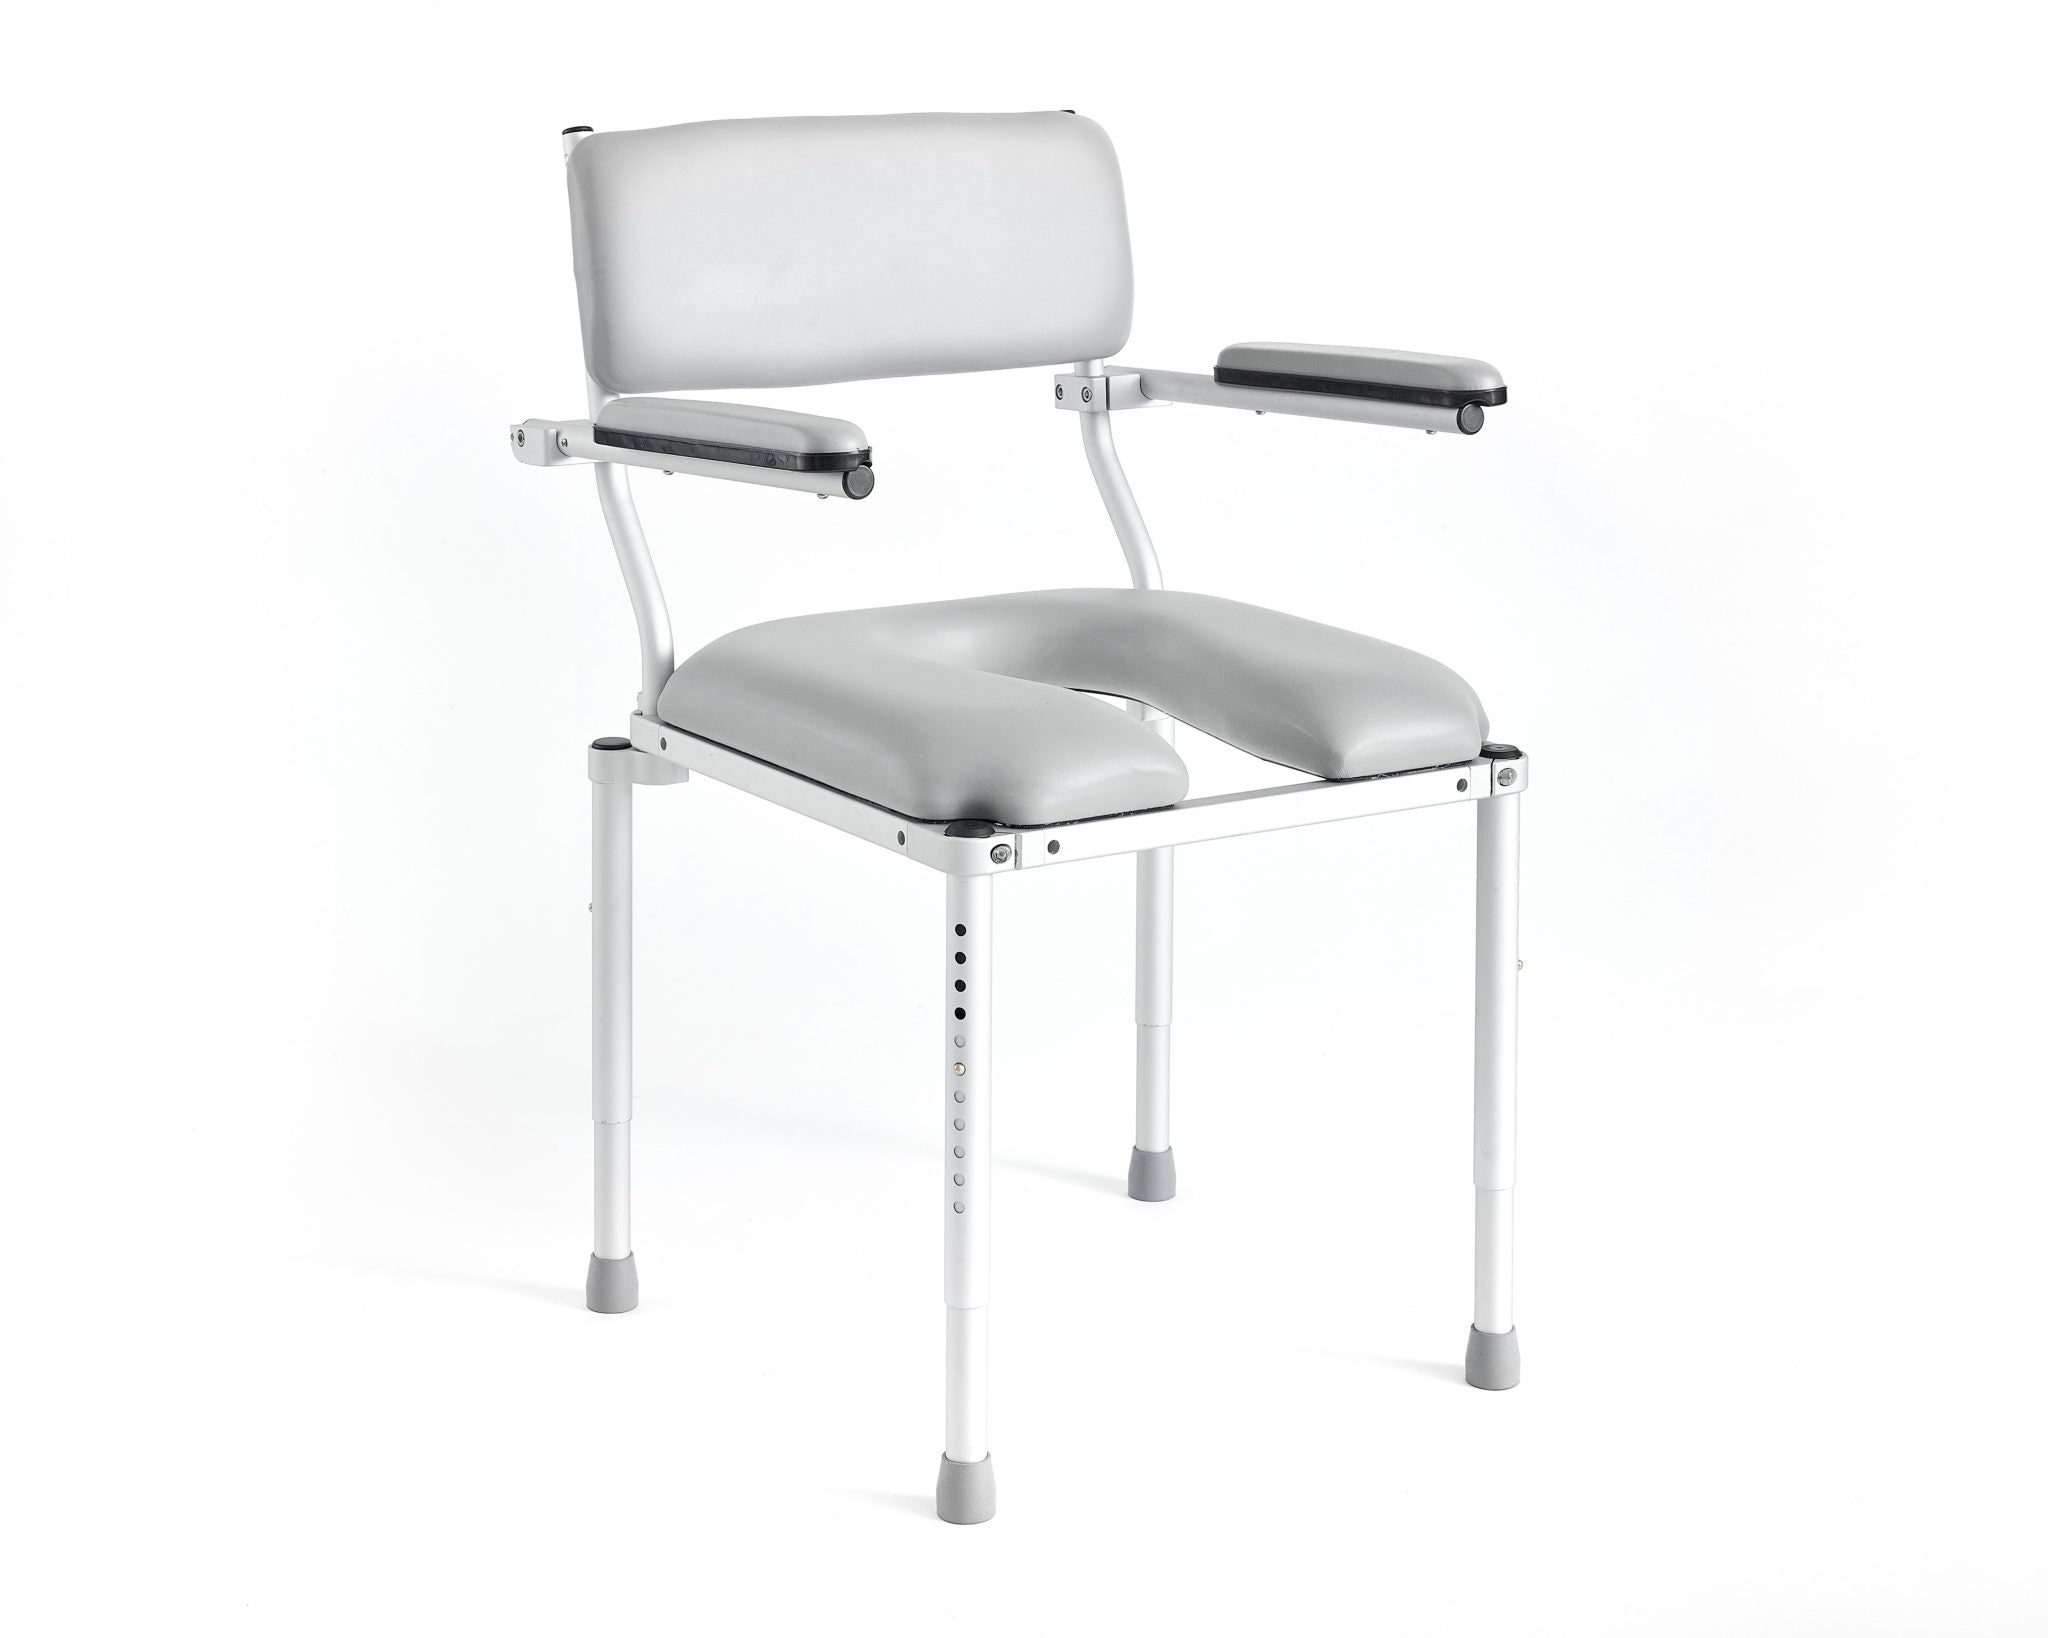 Nuprodx multiCHAIR 3200 Shower/Commode Chair